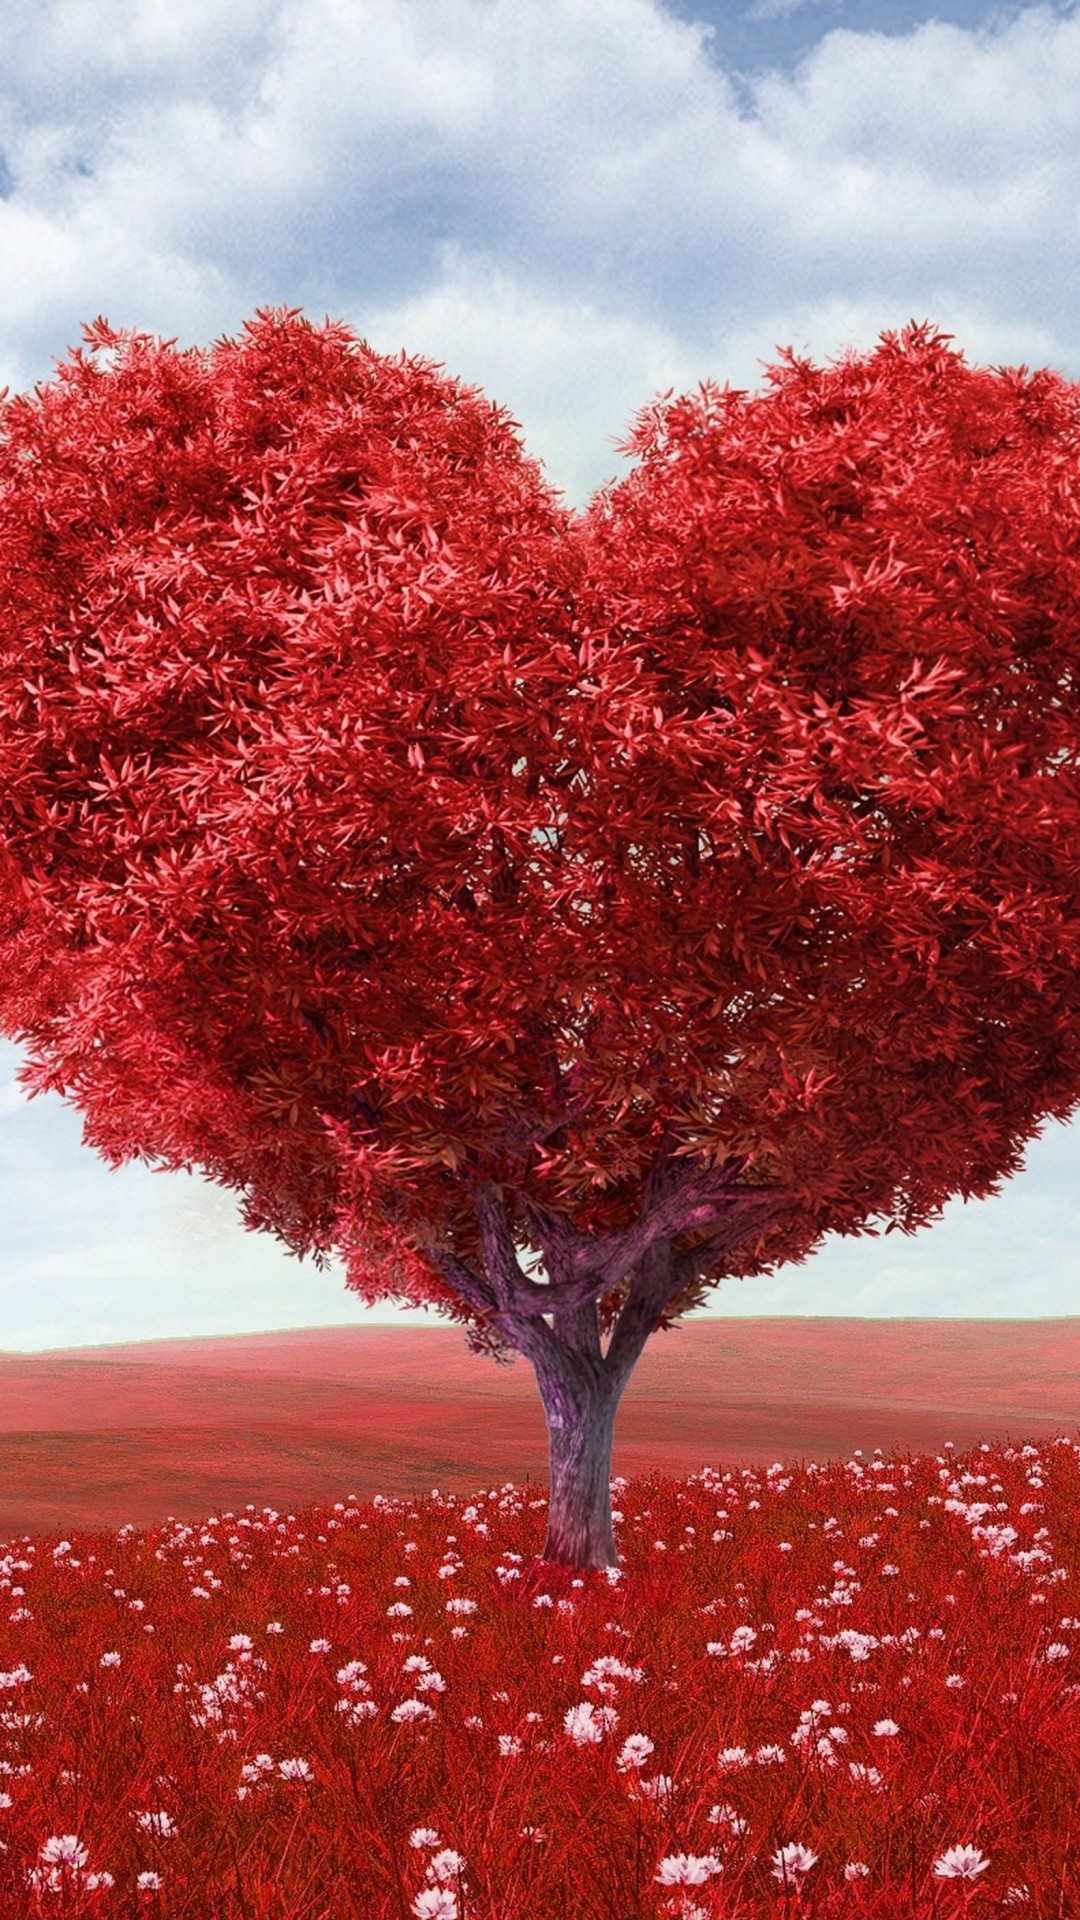 The Tree Of Love Wallpaper for SAMSUNG Galaxy Note 3